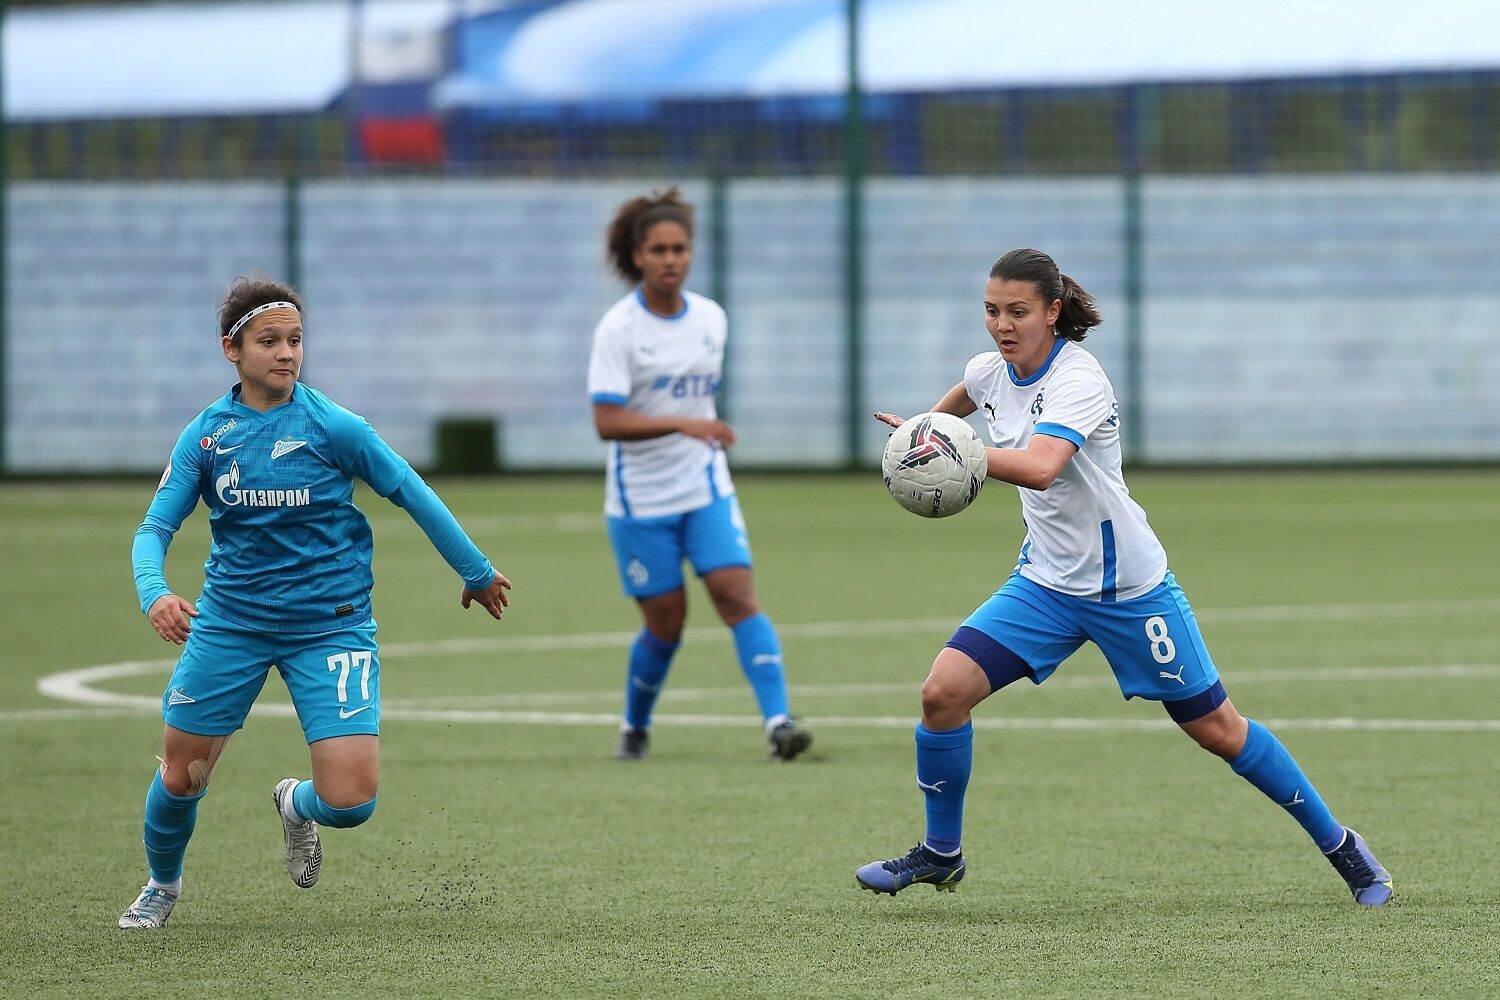 Photo gallery from match against Zenit